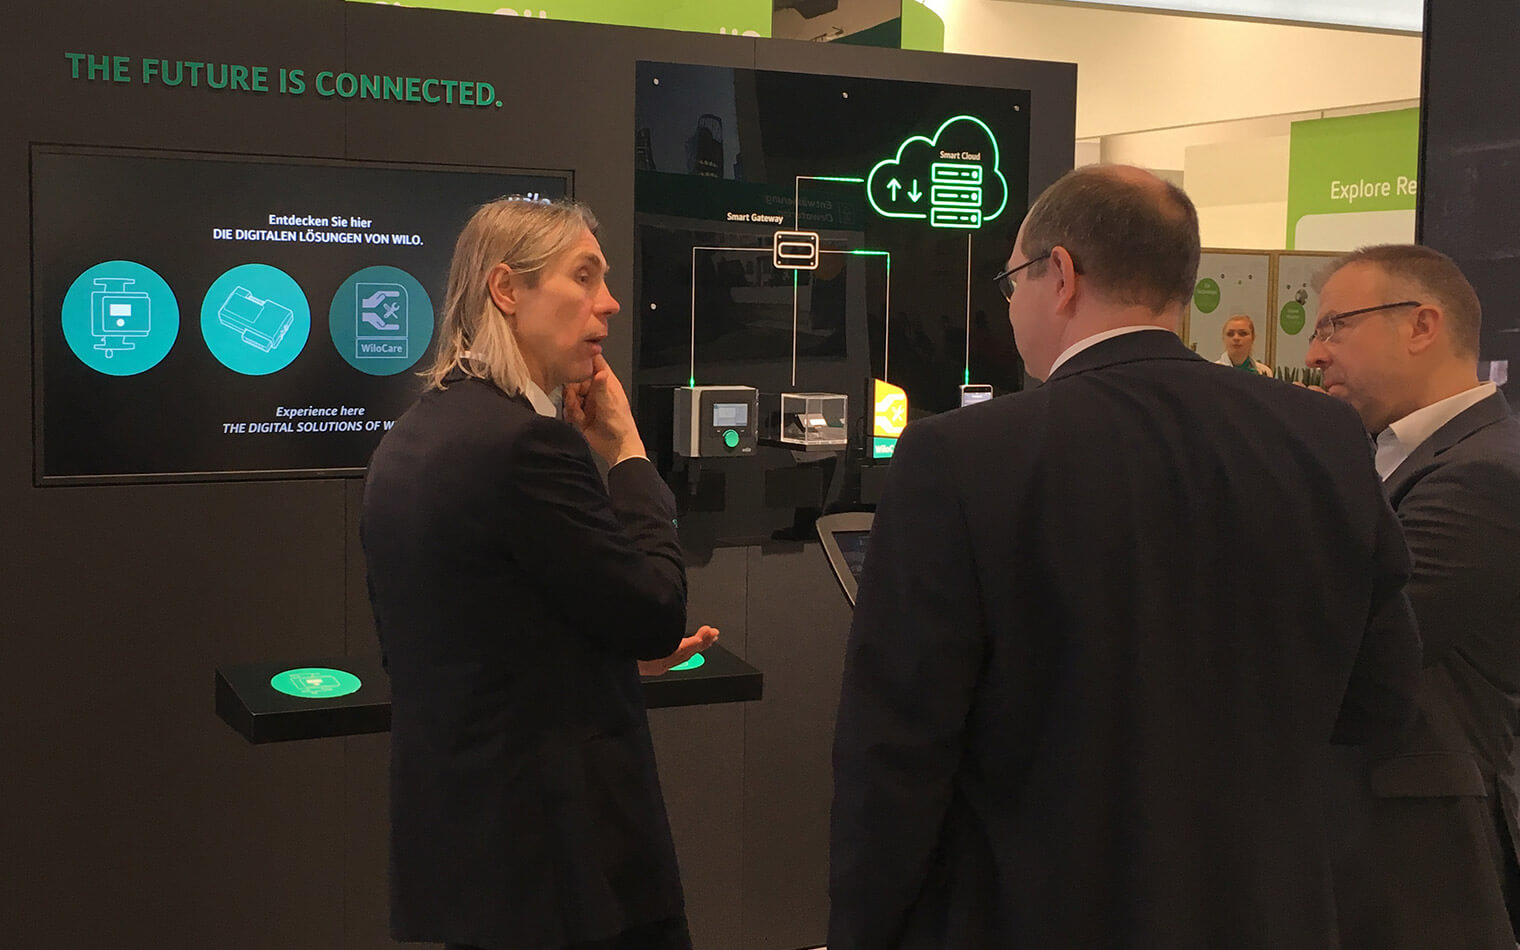 This picture shows a Wilo employee talking about the new connectivity of Wilo products at the ISH 2019 trade fair in Frankfurt am Main.